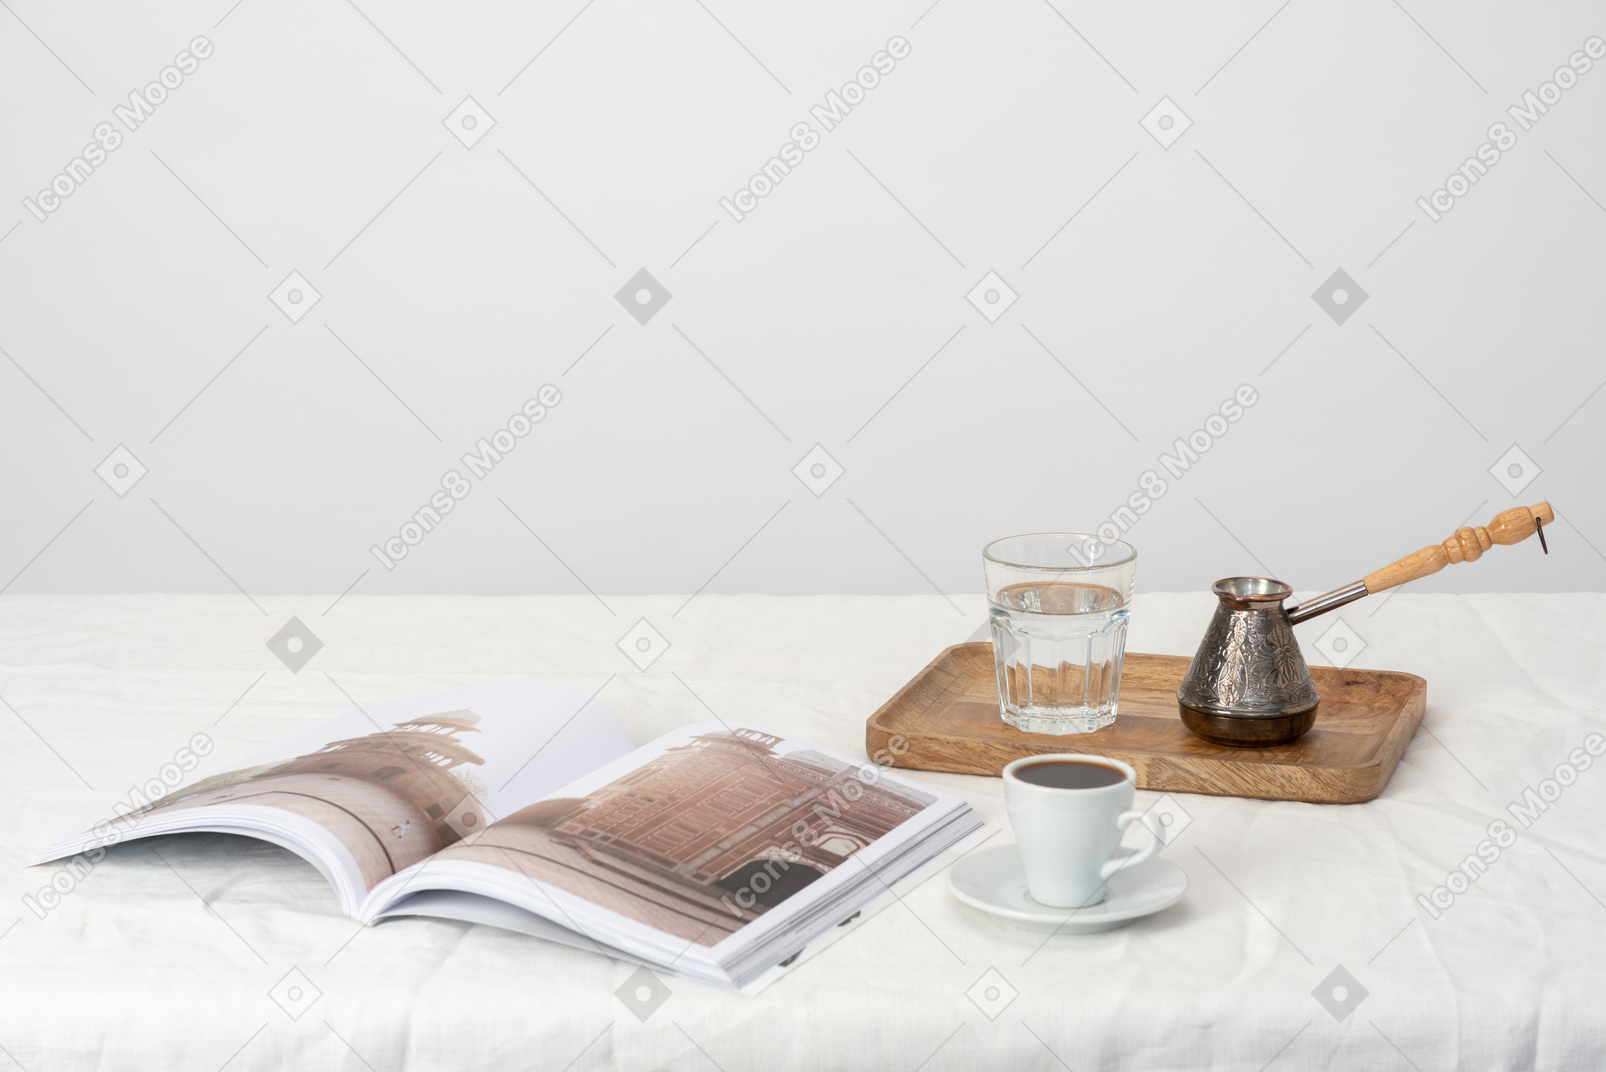 Cezve and glass of water on the tray, magazine and cup of coffee